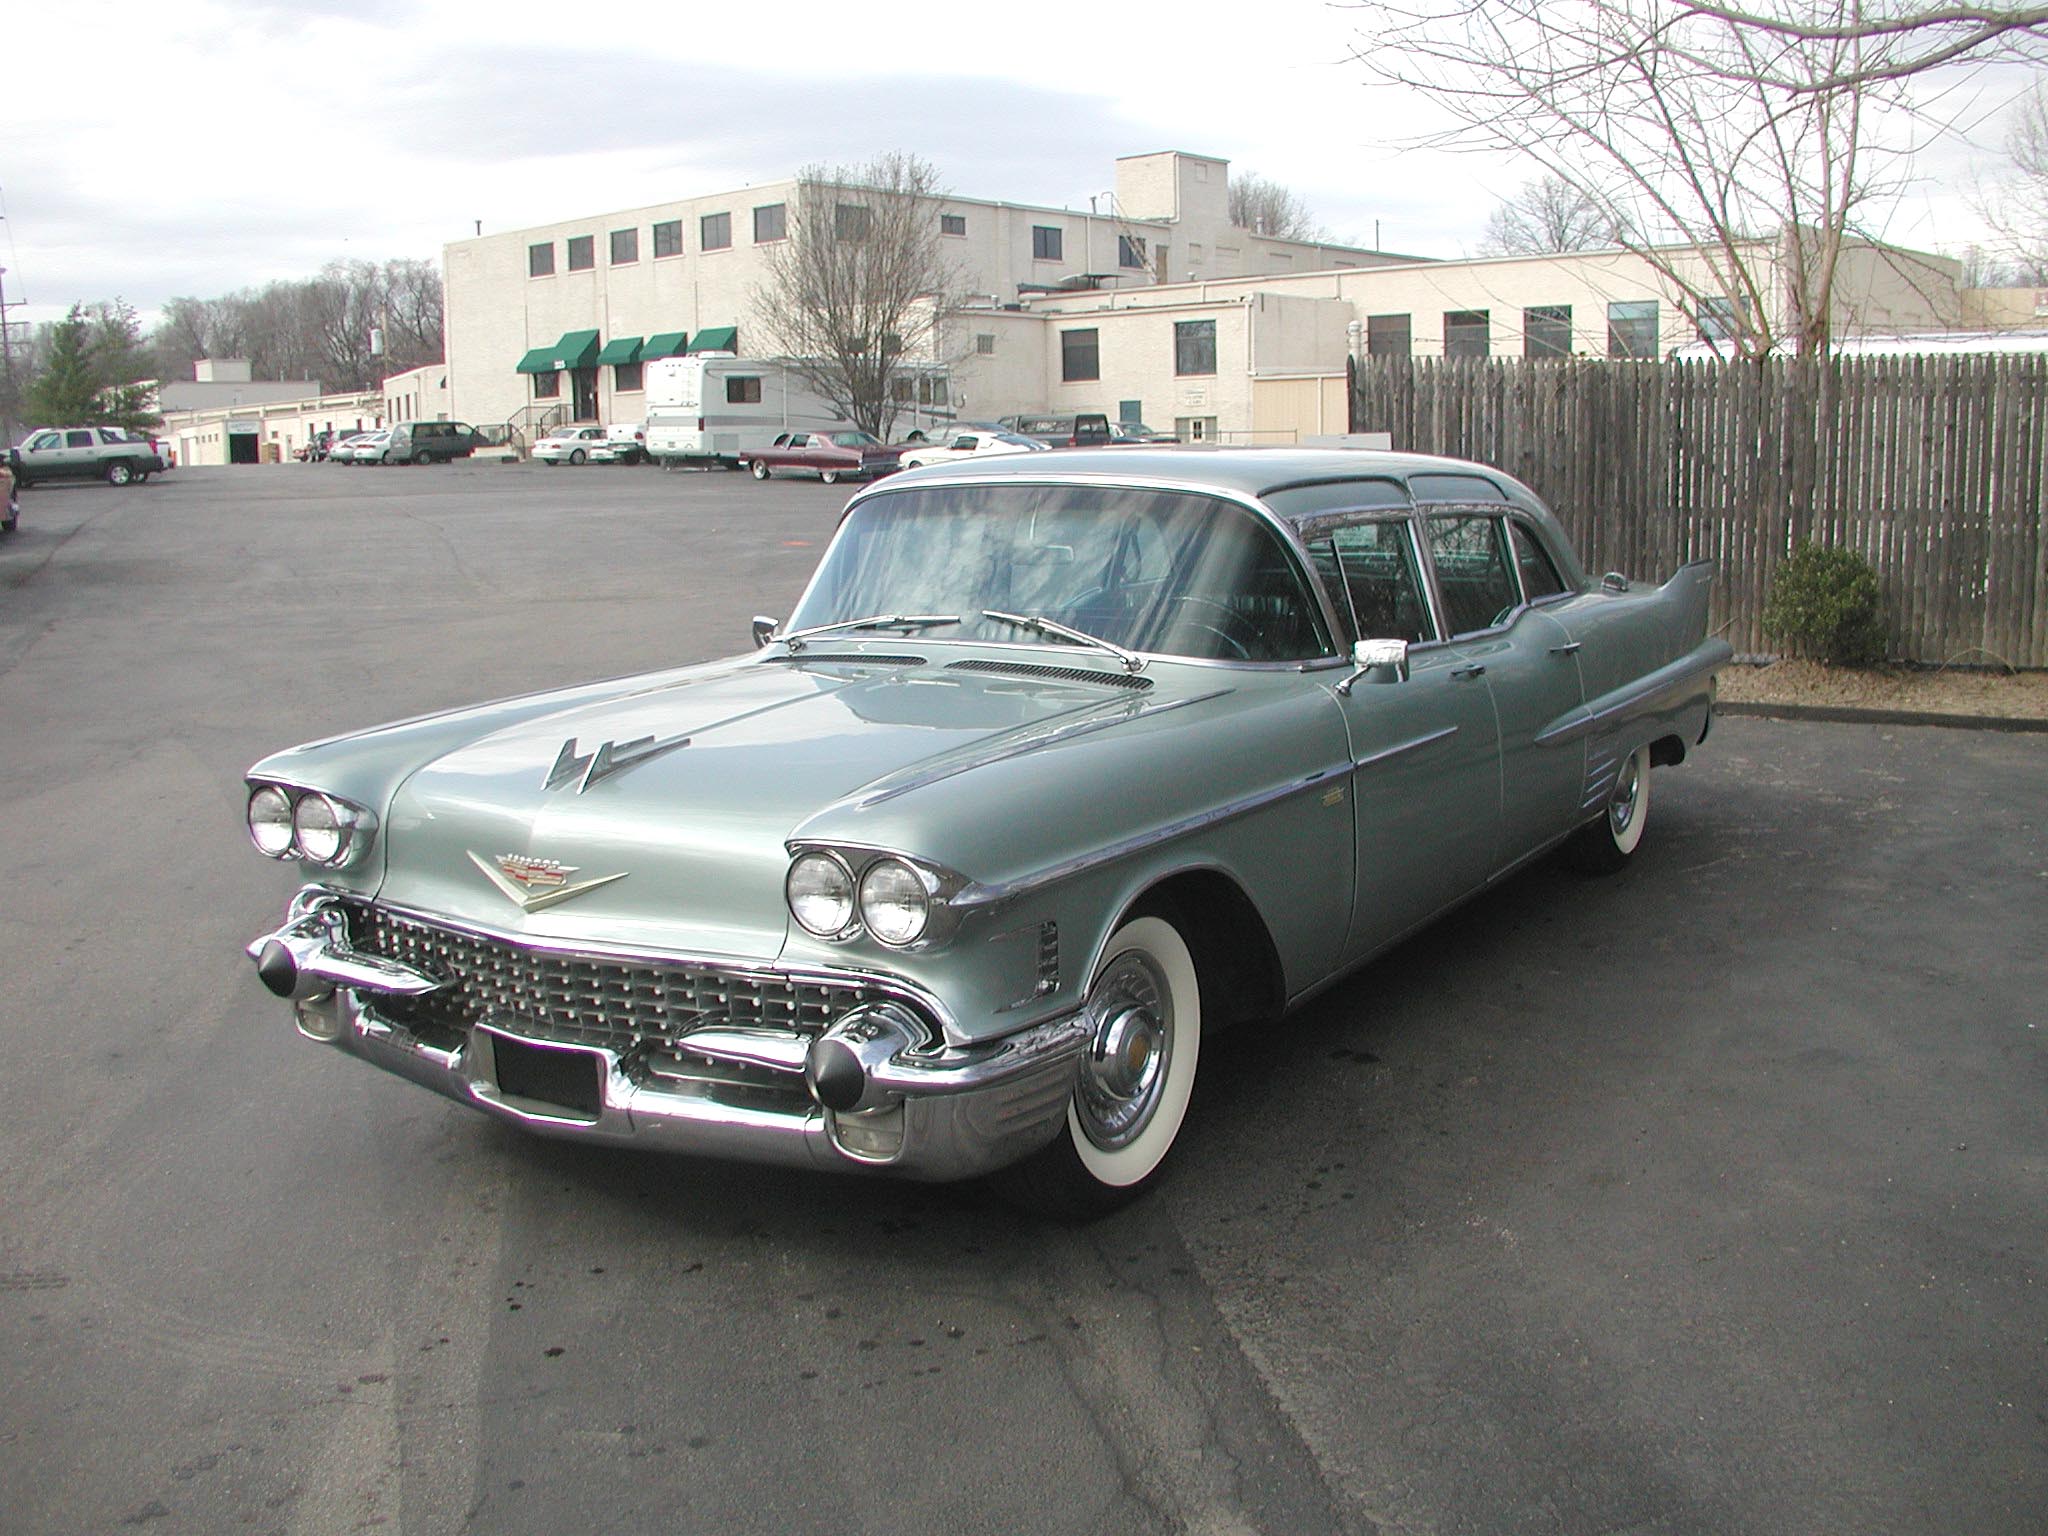 1957 cadillac fleetwood series 75 imperial